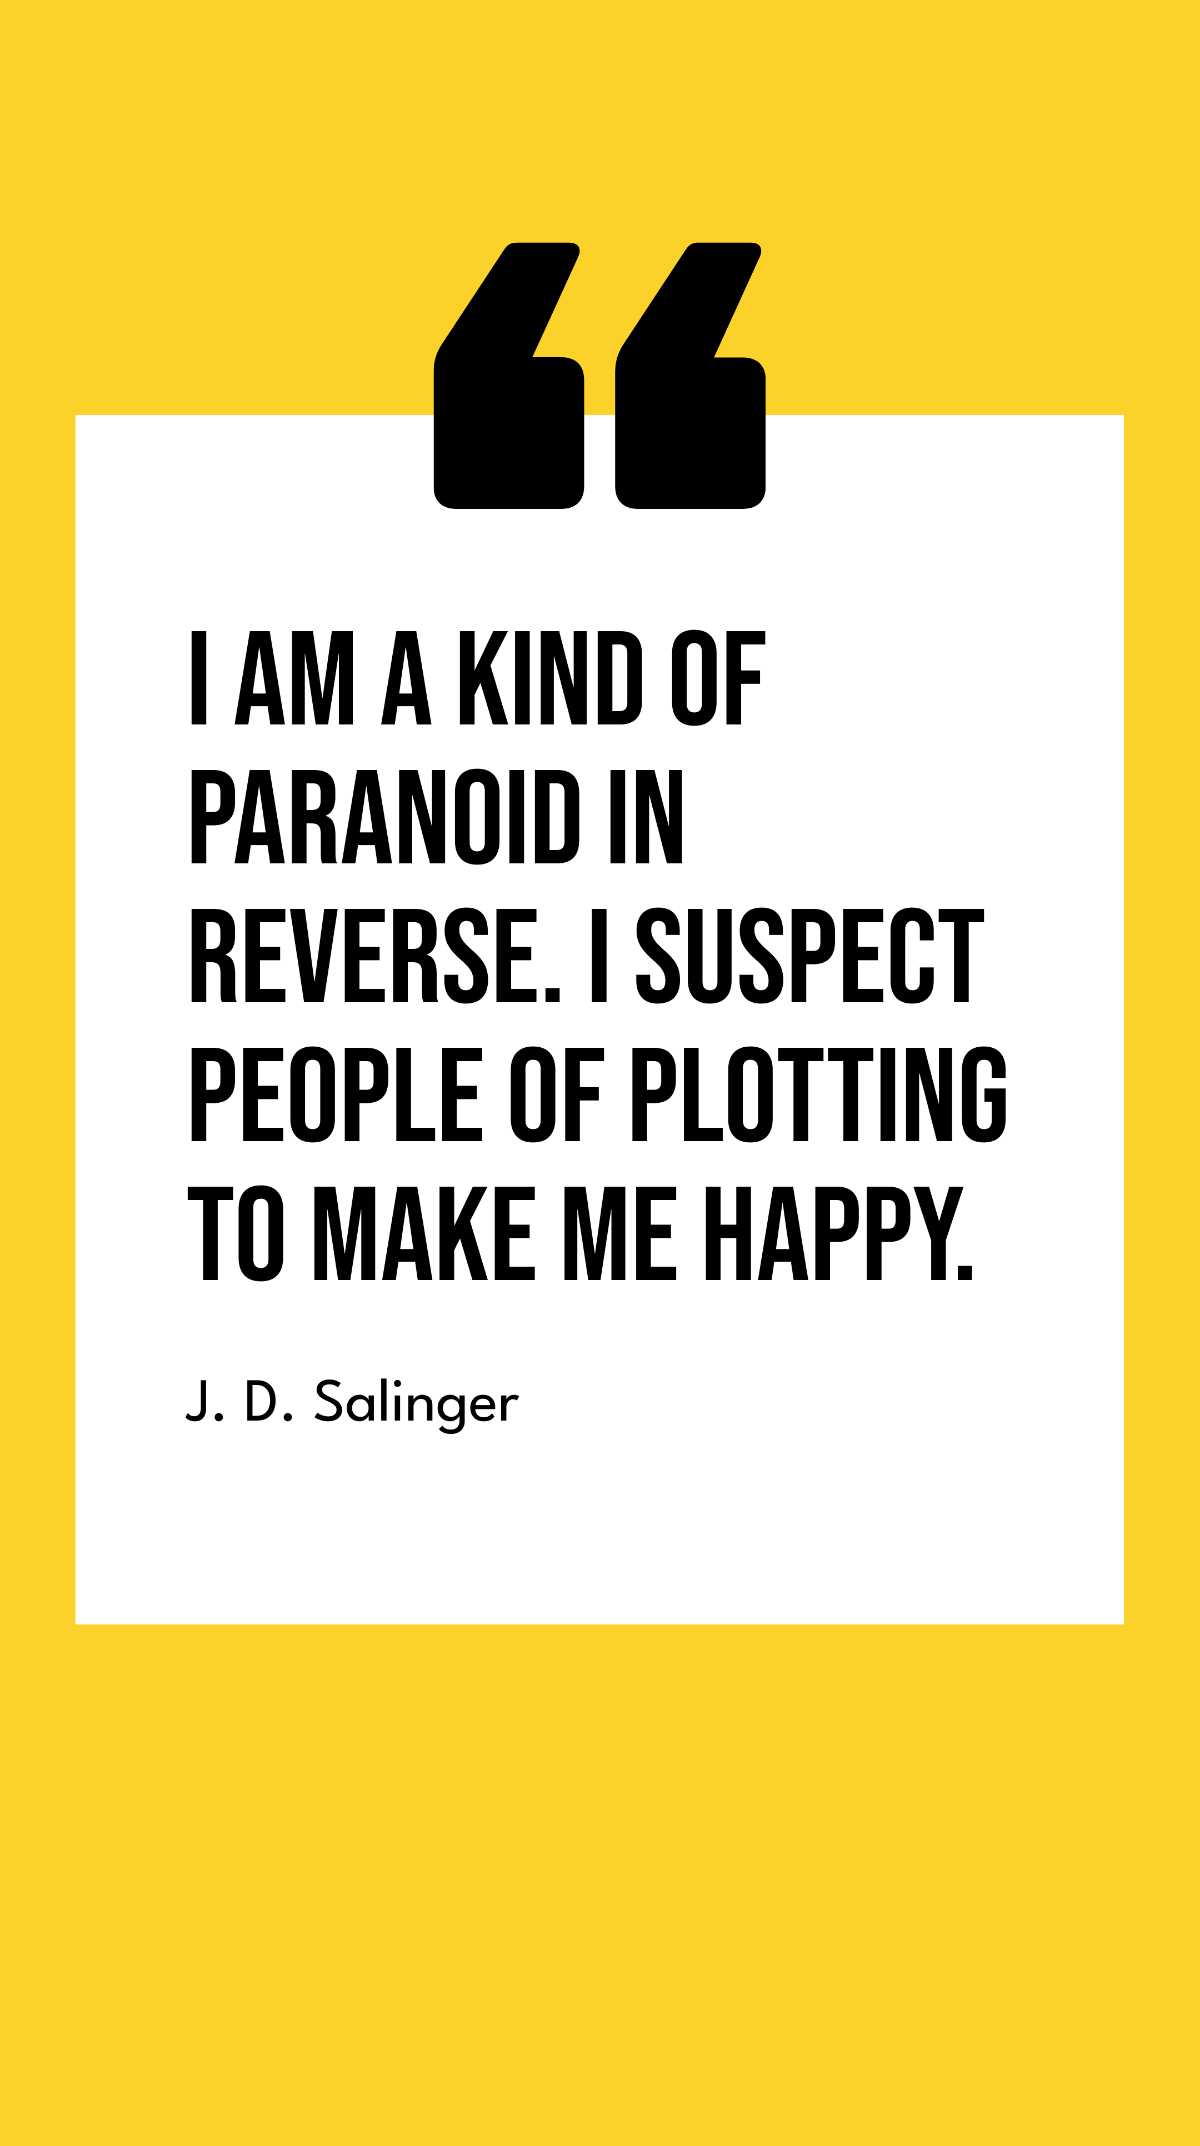 J. D. Salinger - I am a kind of paranoid in reverse. I suspect people of plotting to make me happy. Template